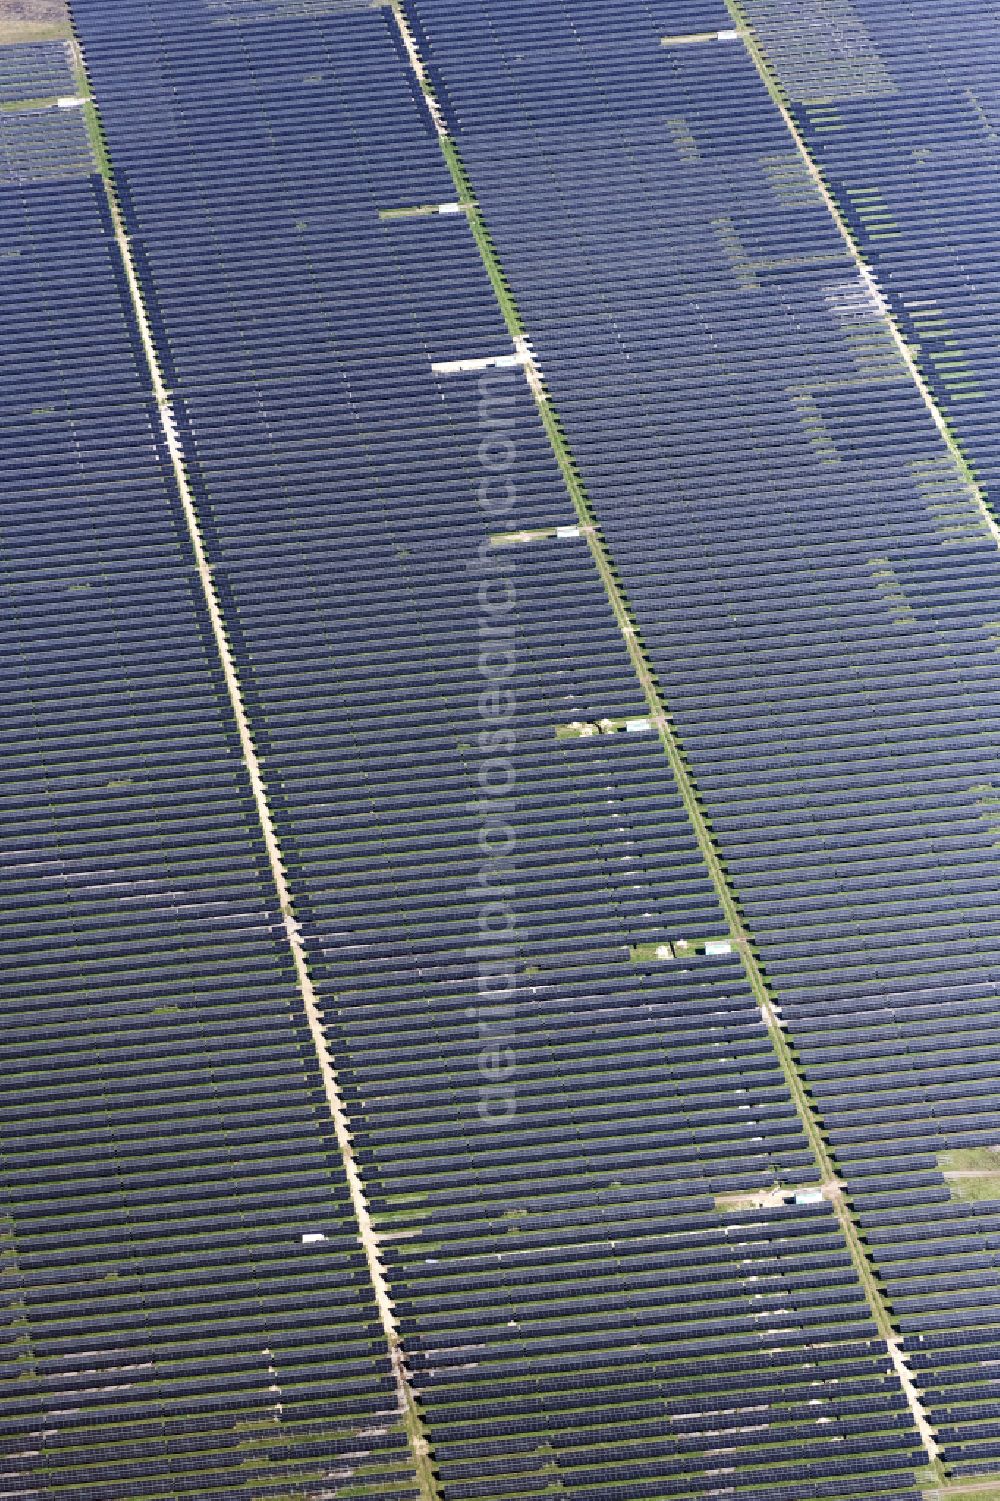 Aerial photograph Brandenburg an der Havel - Solar park on the former NVA airfield Brandenburg-Briest in Brandenburg an der Havel in the Federal State of Brandenburg. It is a joint project between the company of Q-cells and the investors Luxcara GmbH and the MCG group